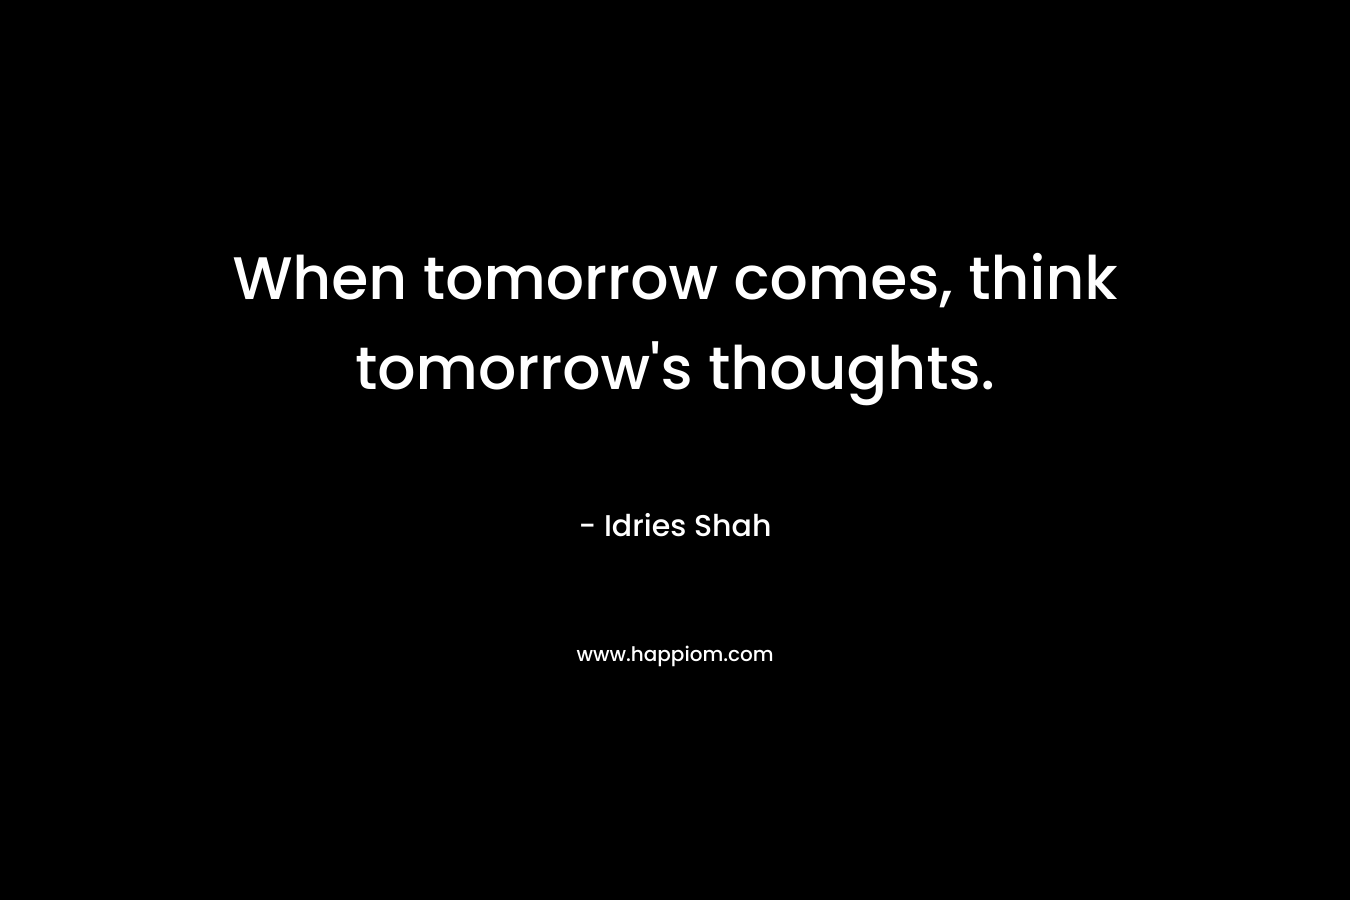 When tomorrow comes, think tomorrow's thoughts.